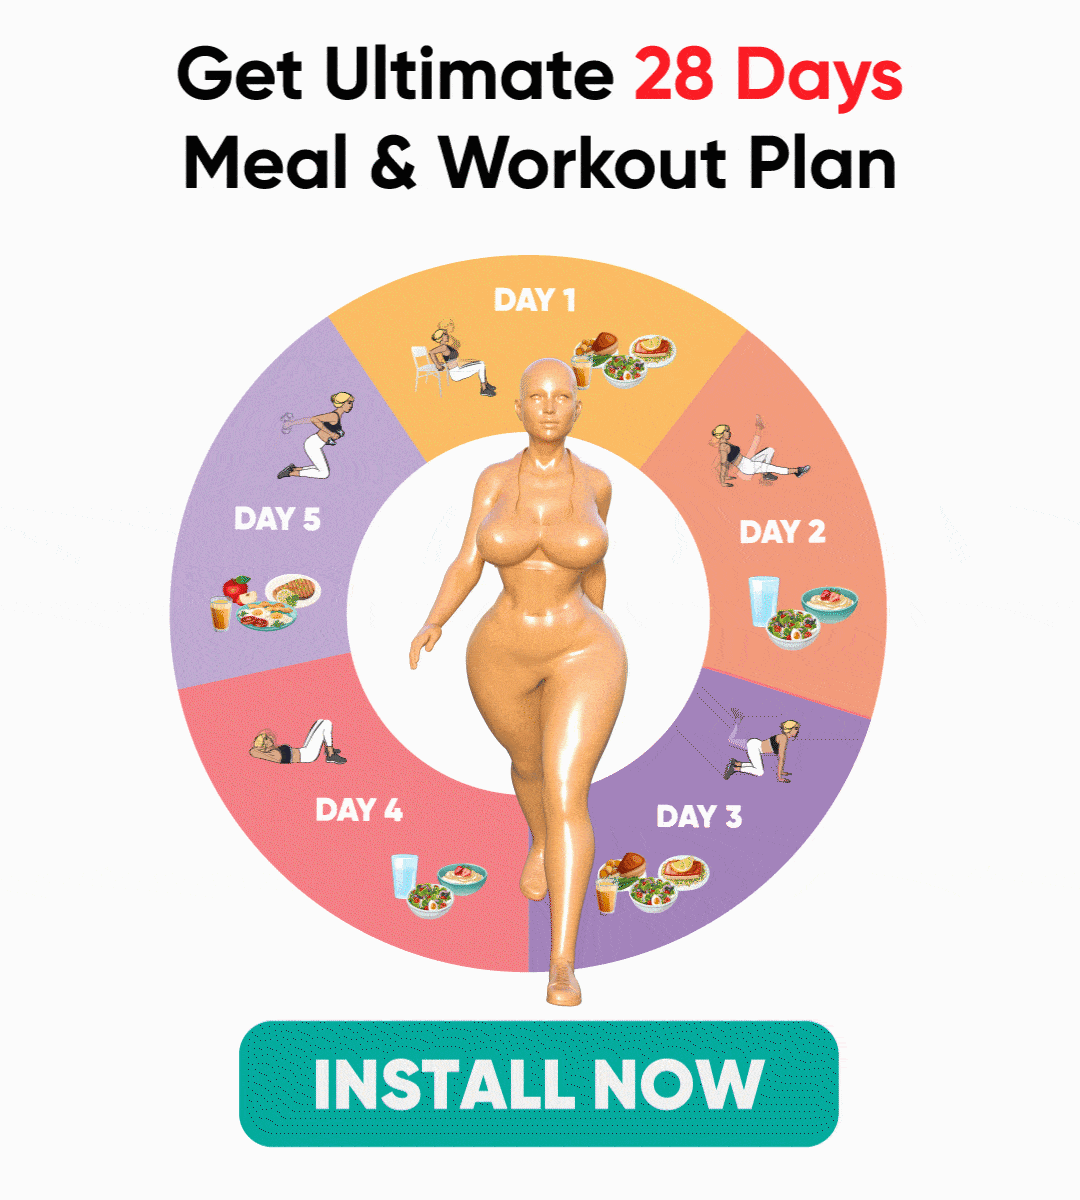 Get Ultimate 28 Days Meal Workout Plan